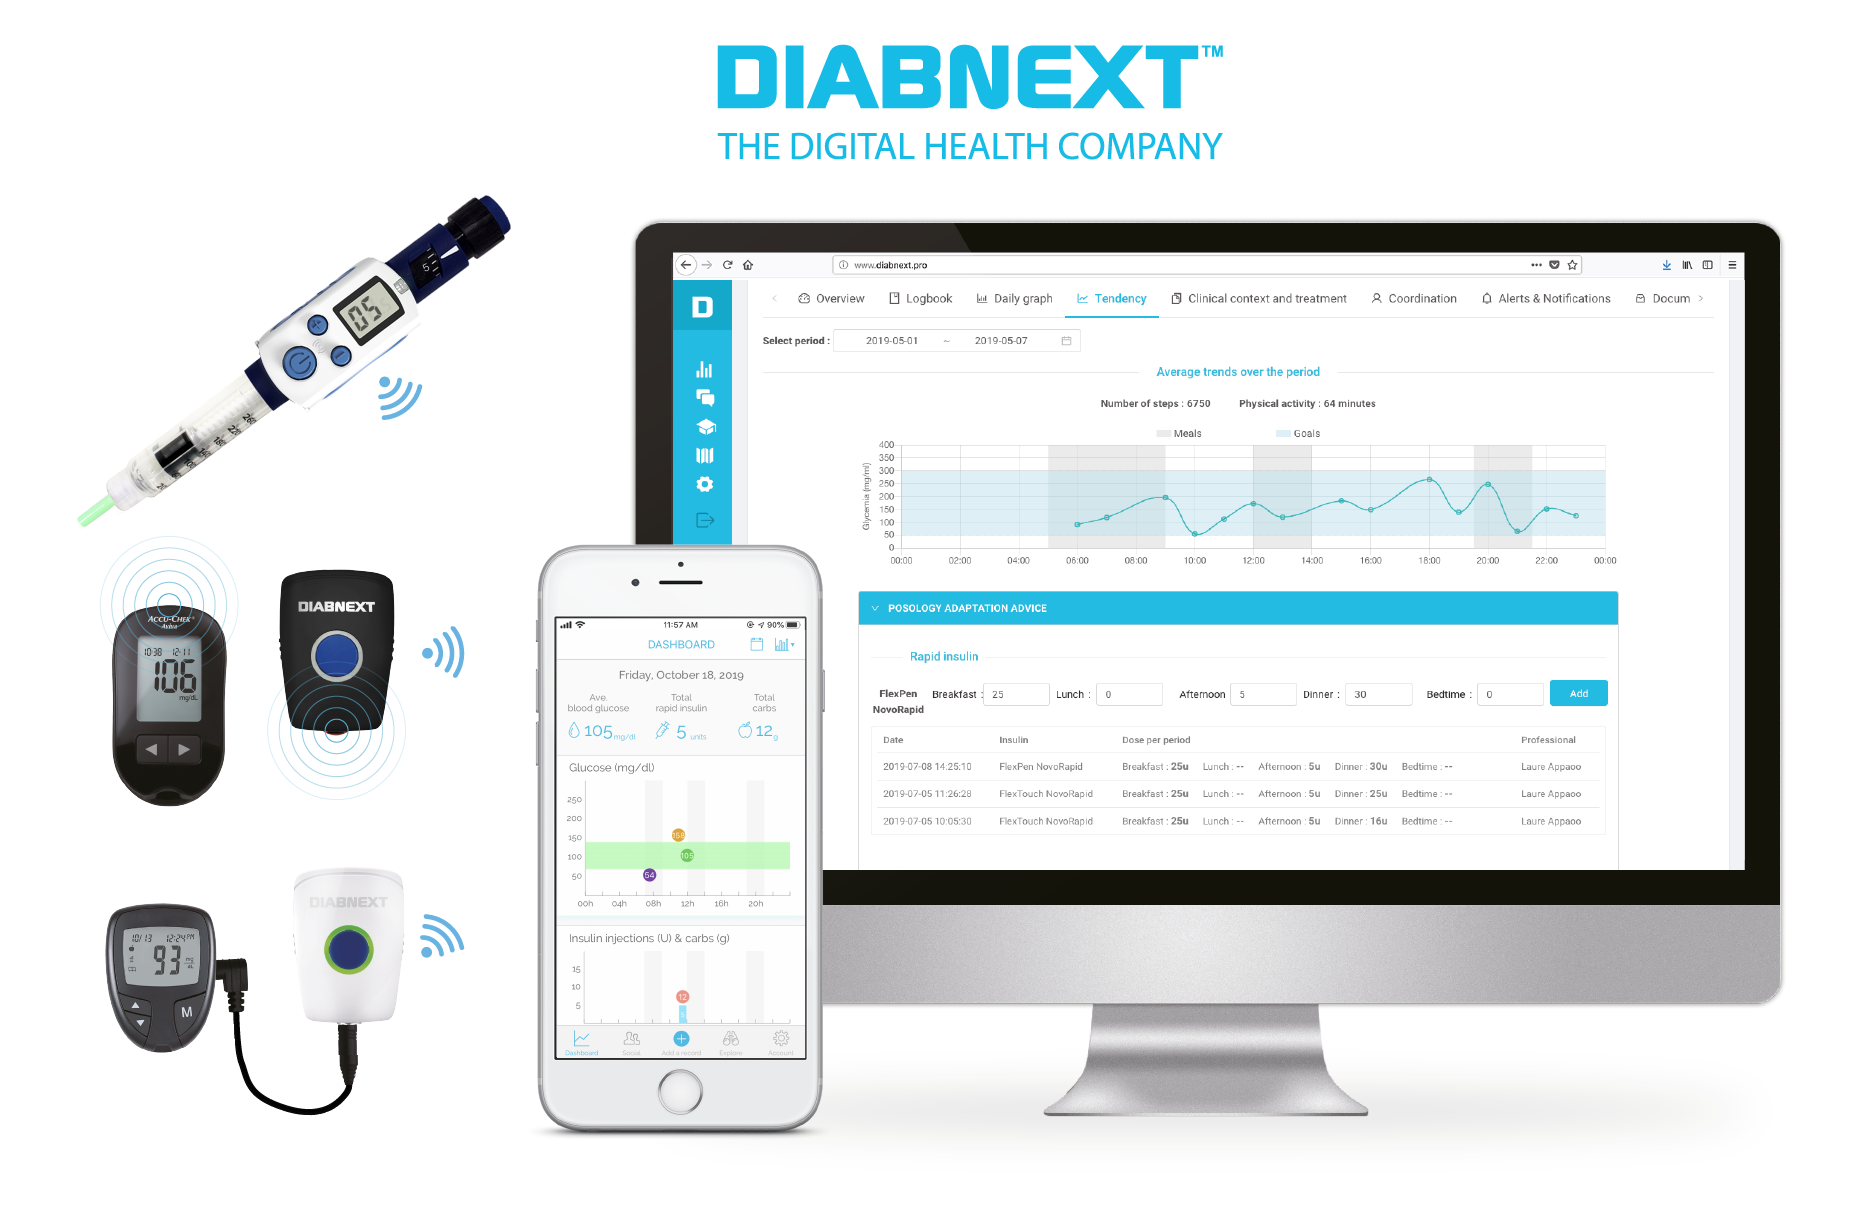 Diabnext Products